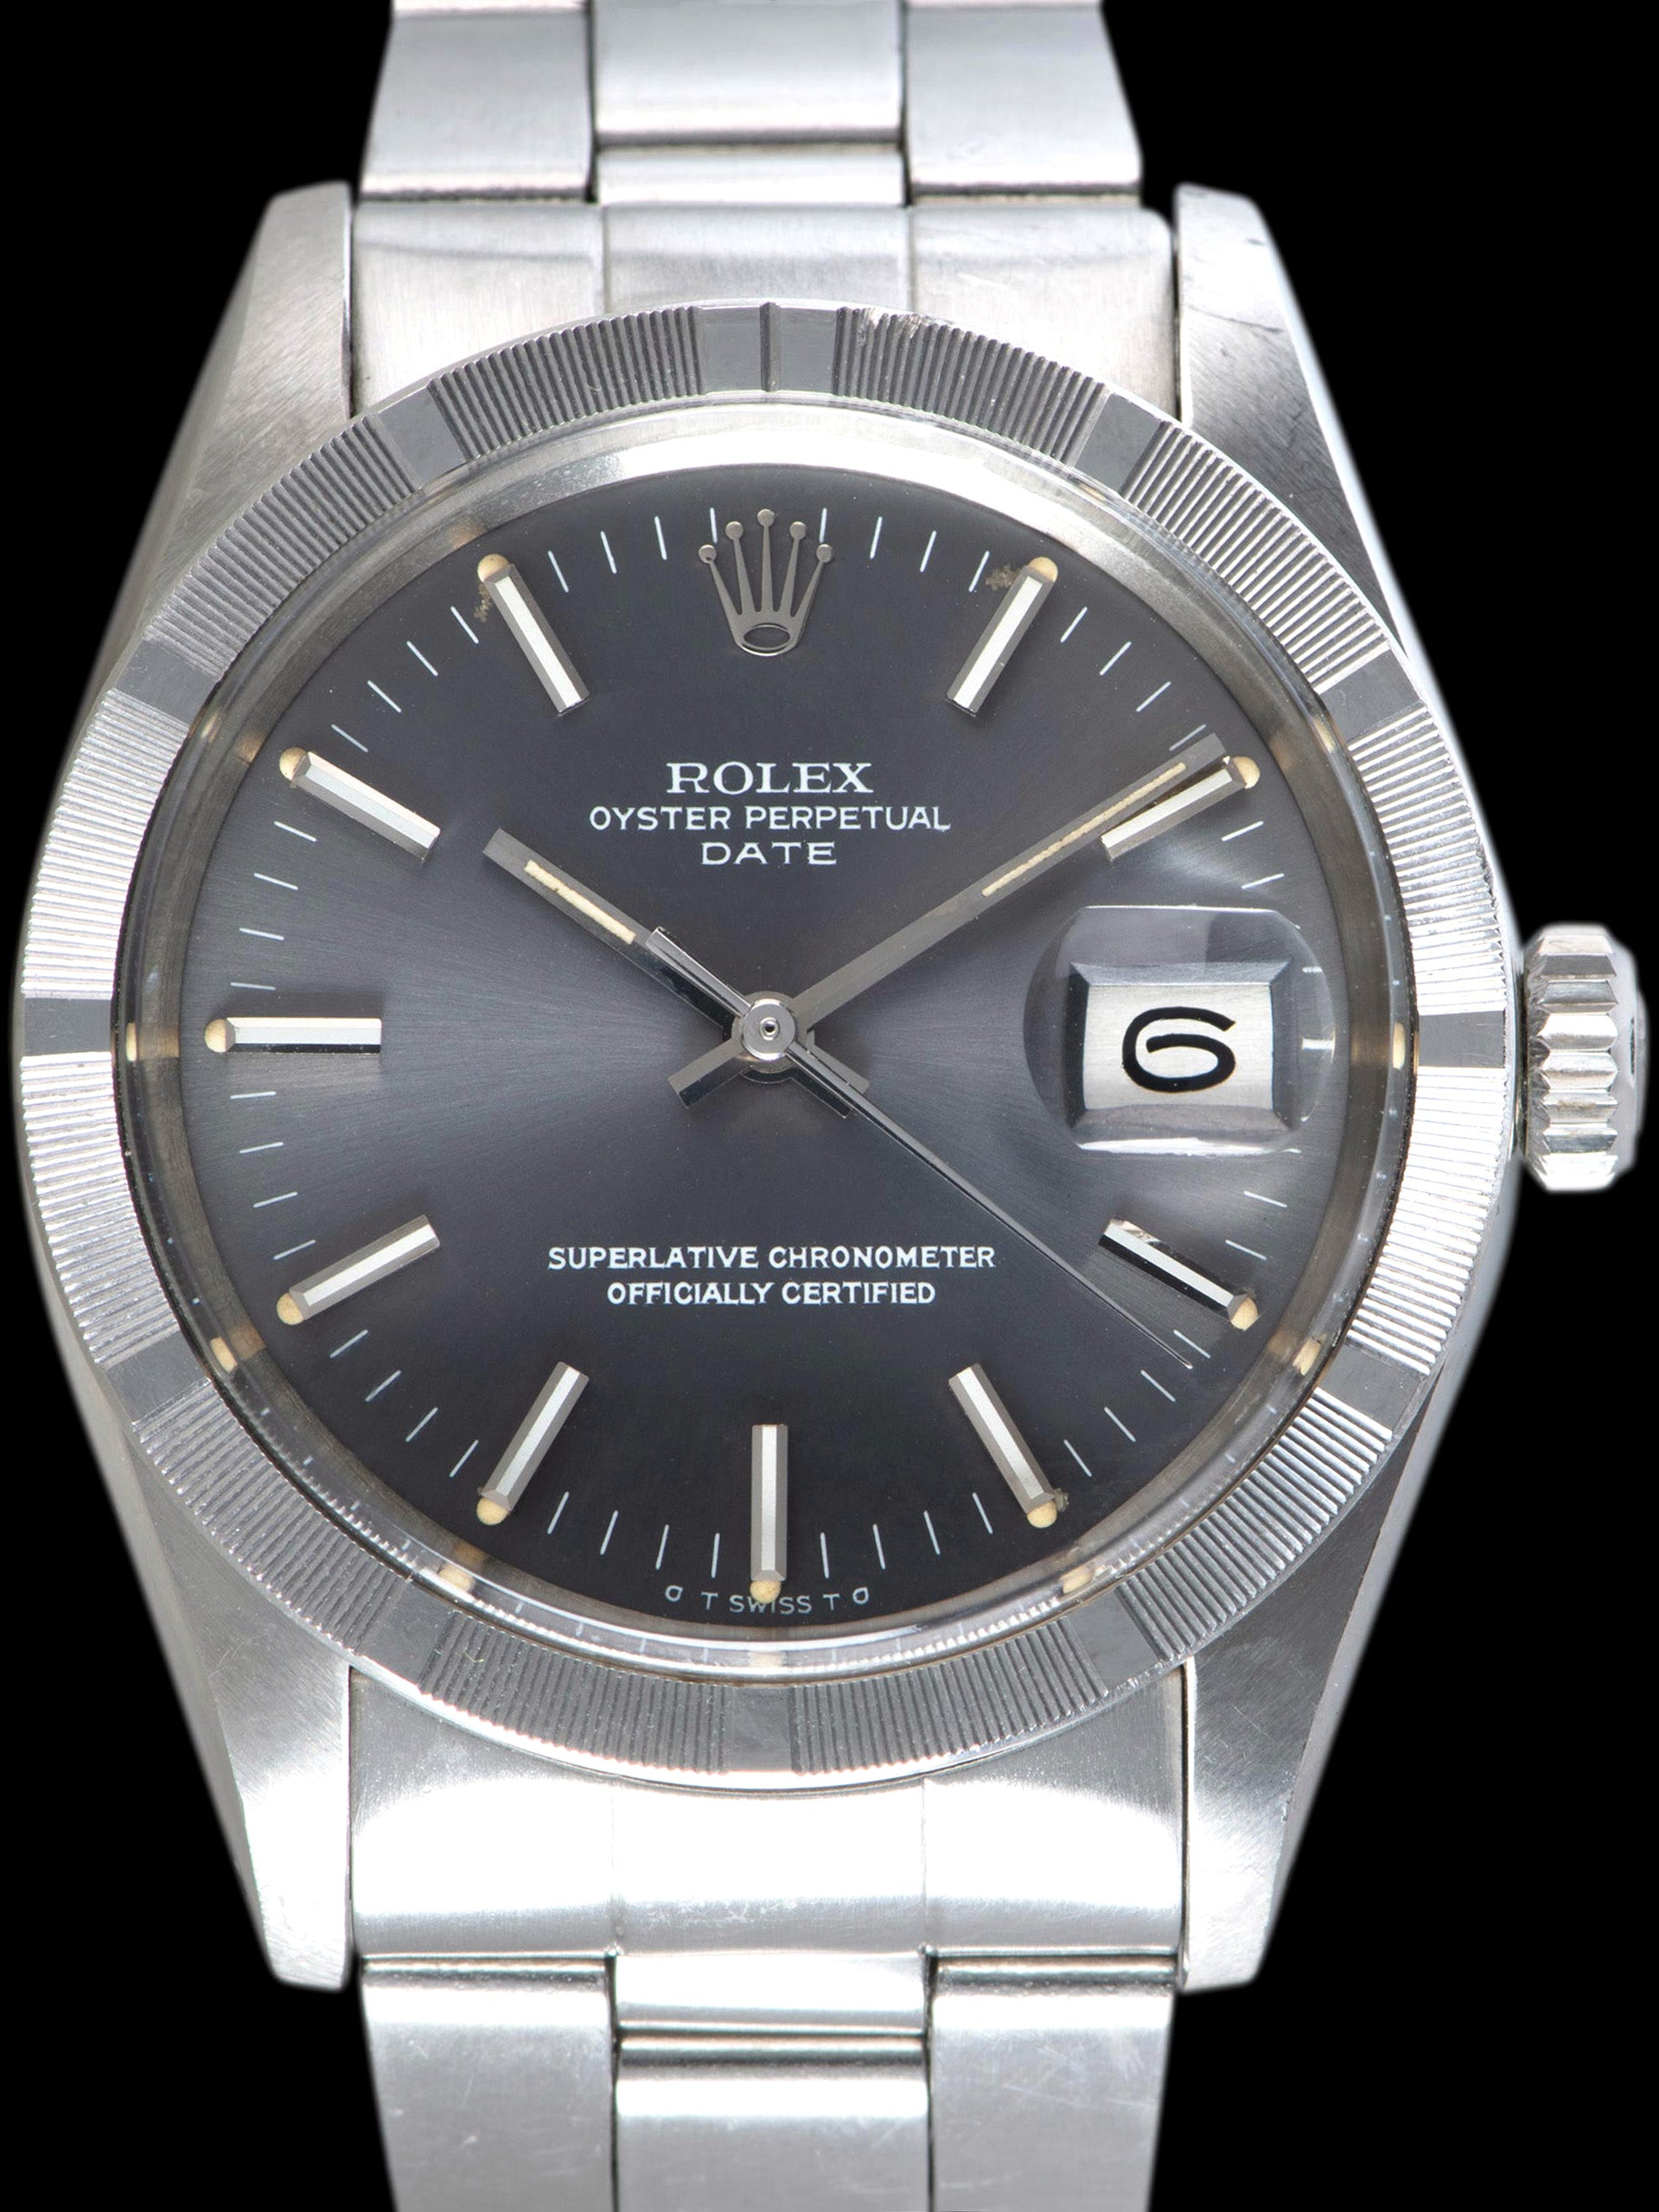 *Unpolished* 1974 Rolex Oyster-Perpetual Date (Ref. 1501) Grey Sigma Dial